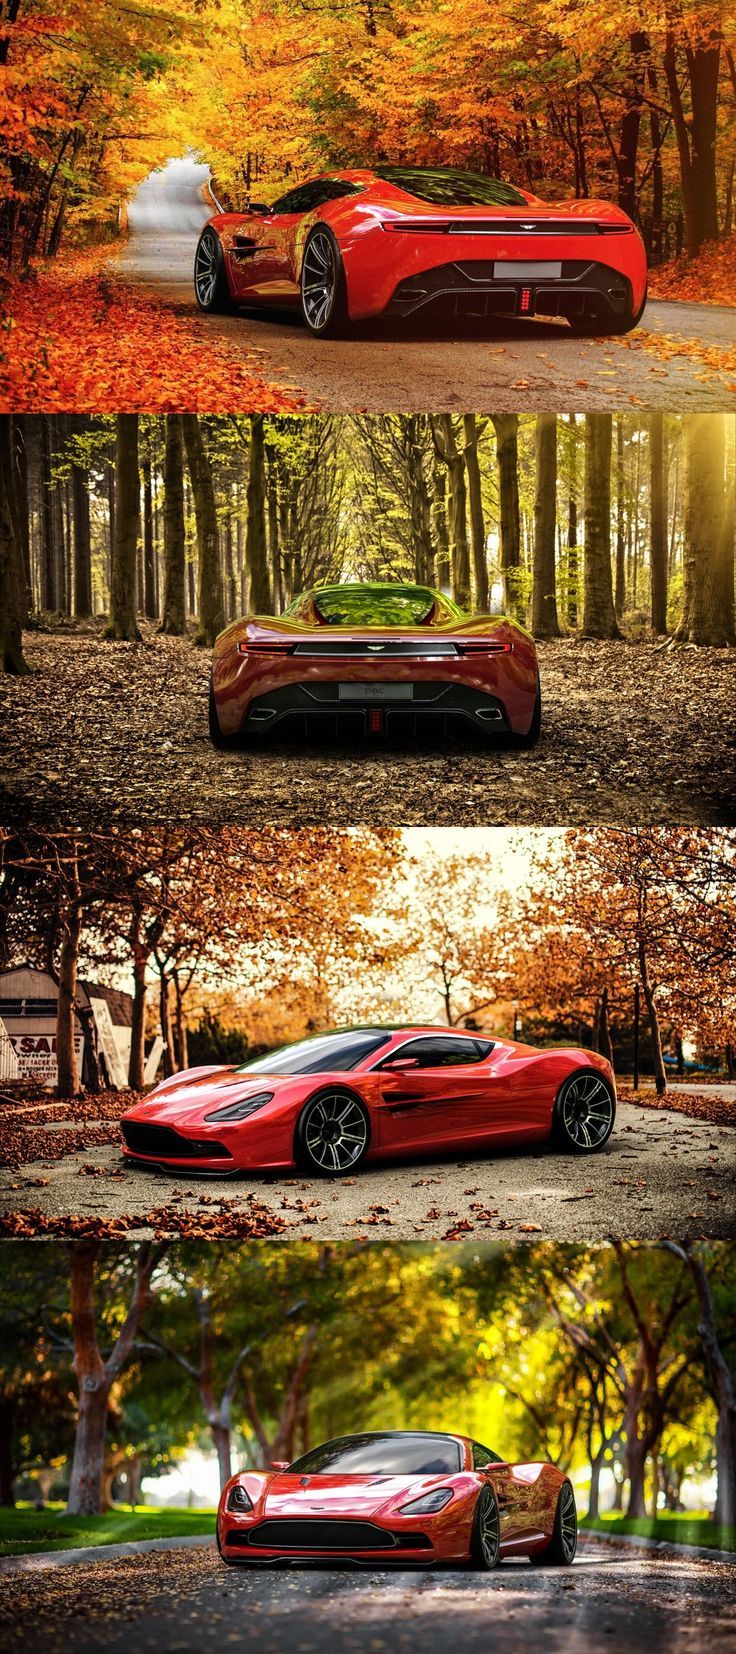 Carhoots | The Hottest, Most Social, Viral Car Content On The Web.